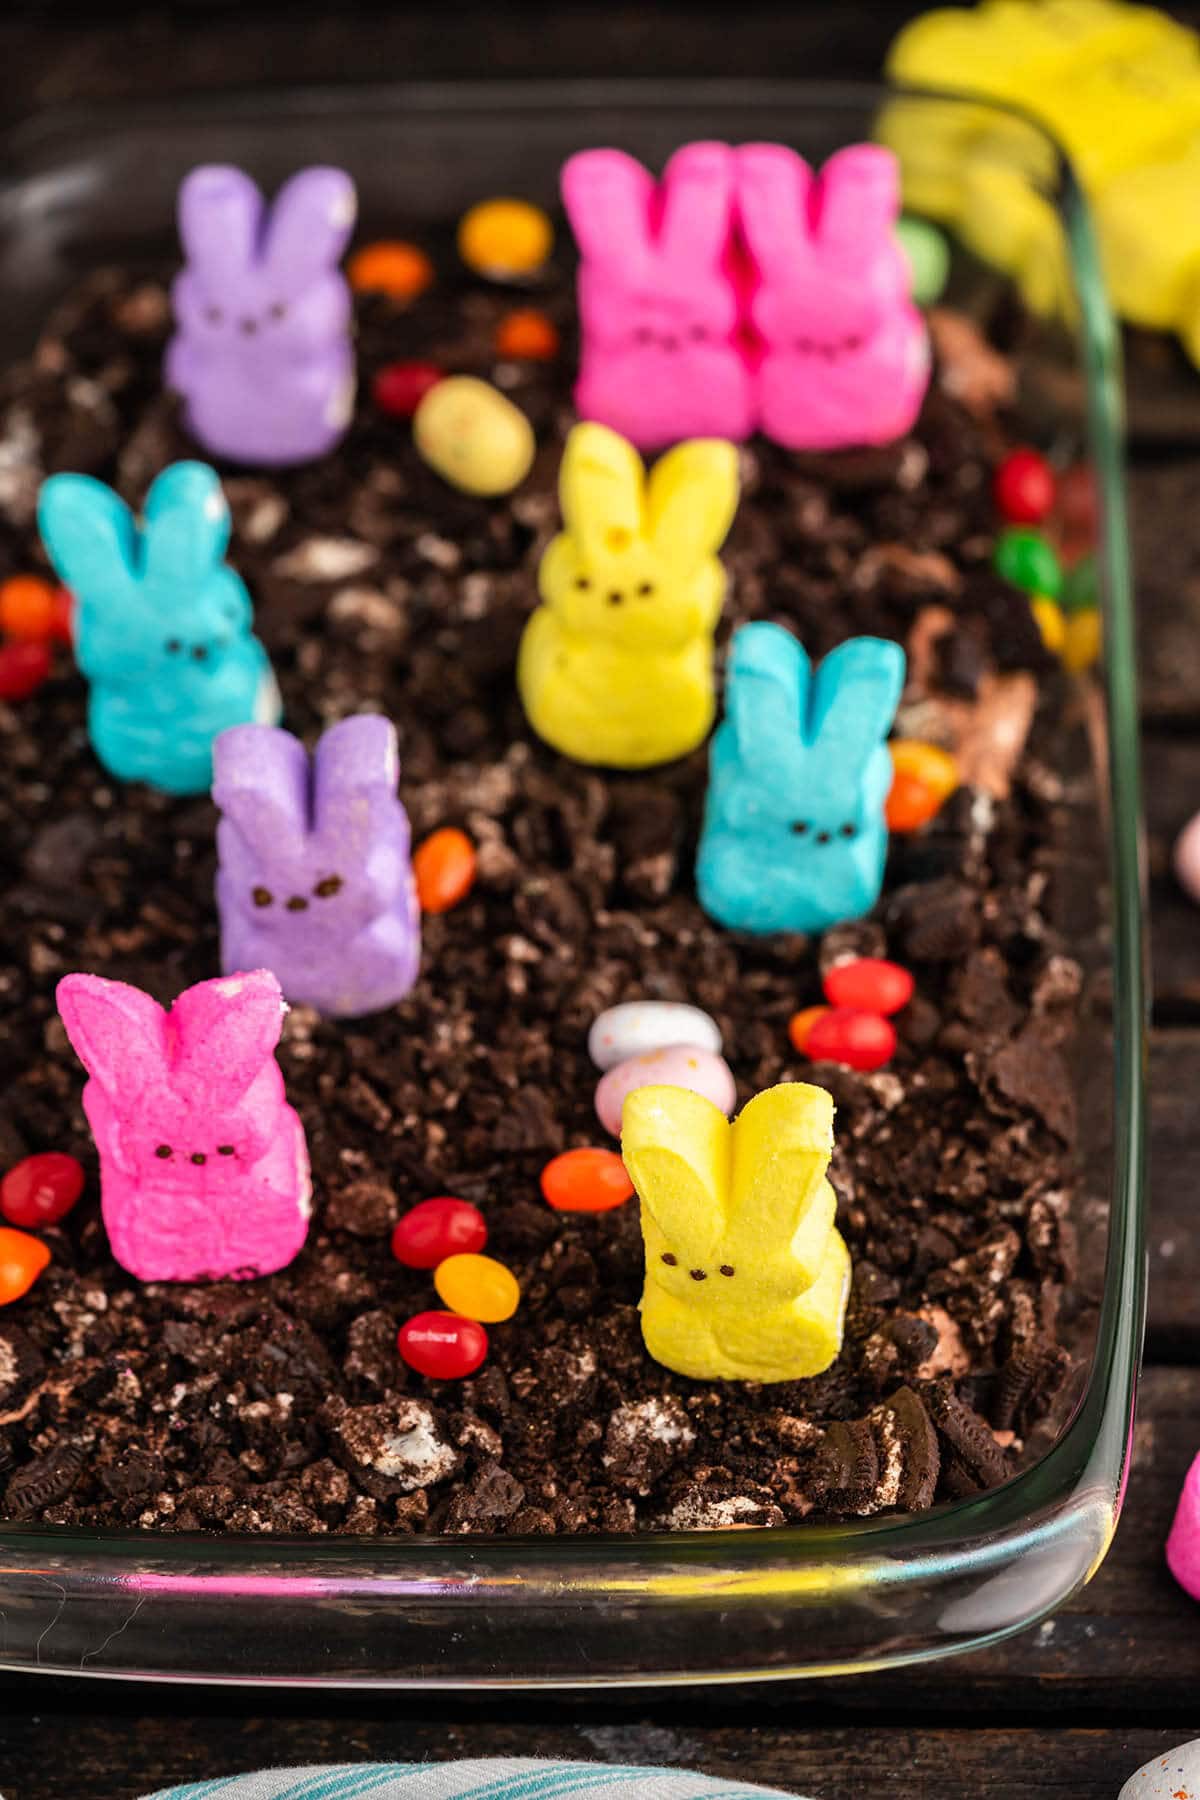 Chocolate dirt cake decorated with peeps and chocolate eggs. 